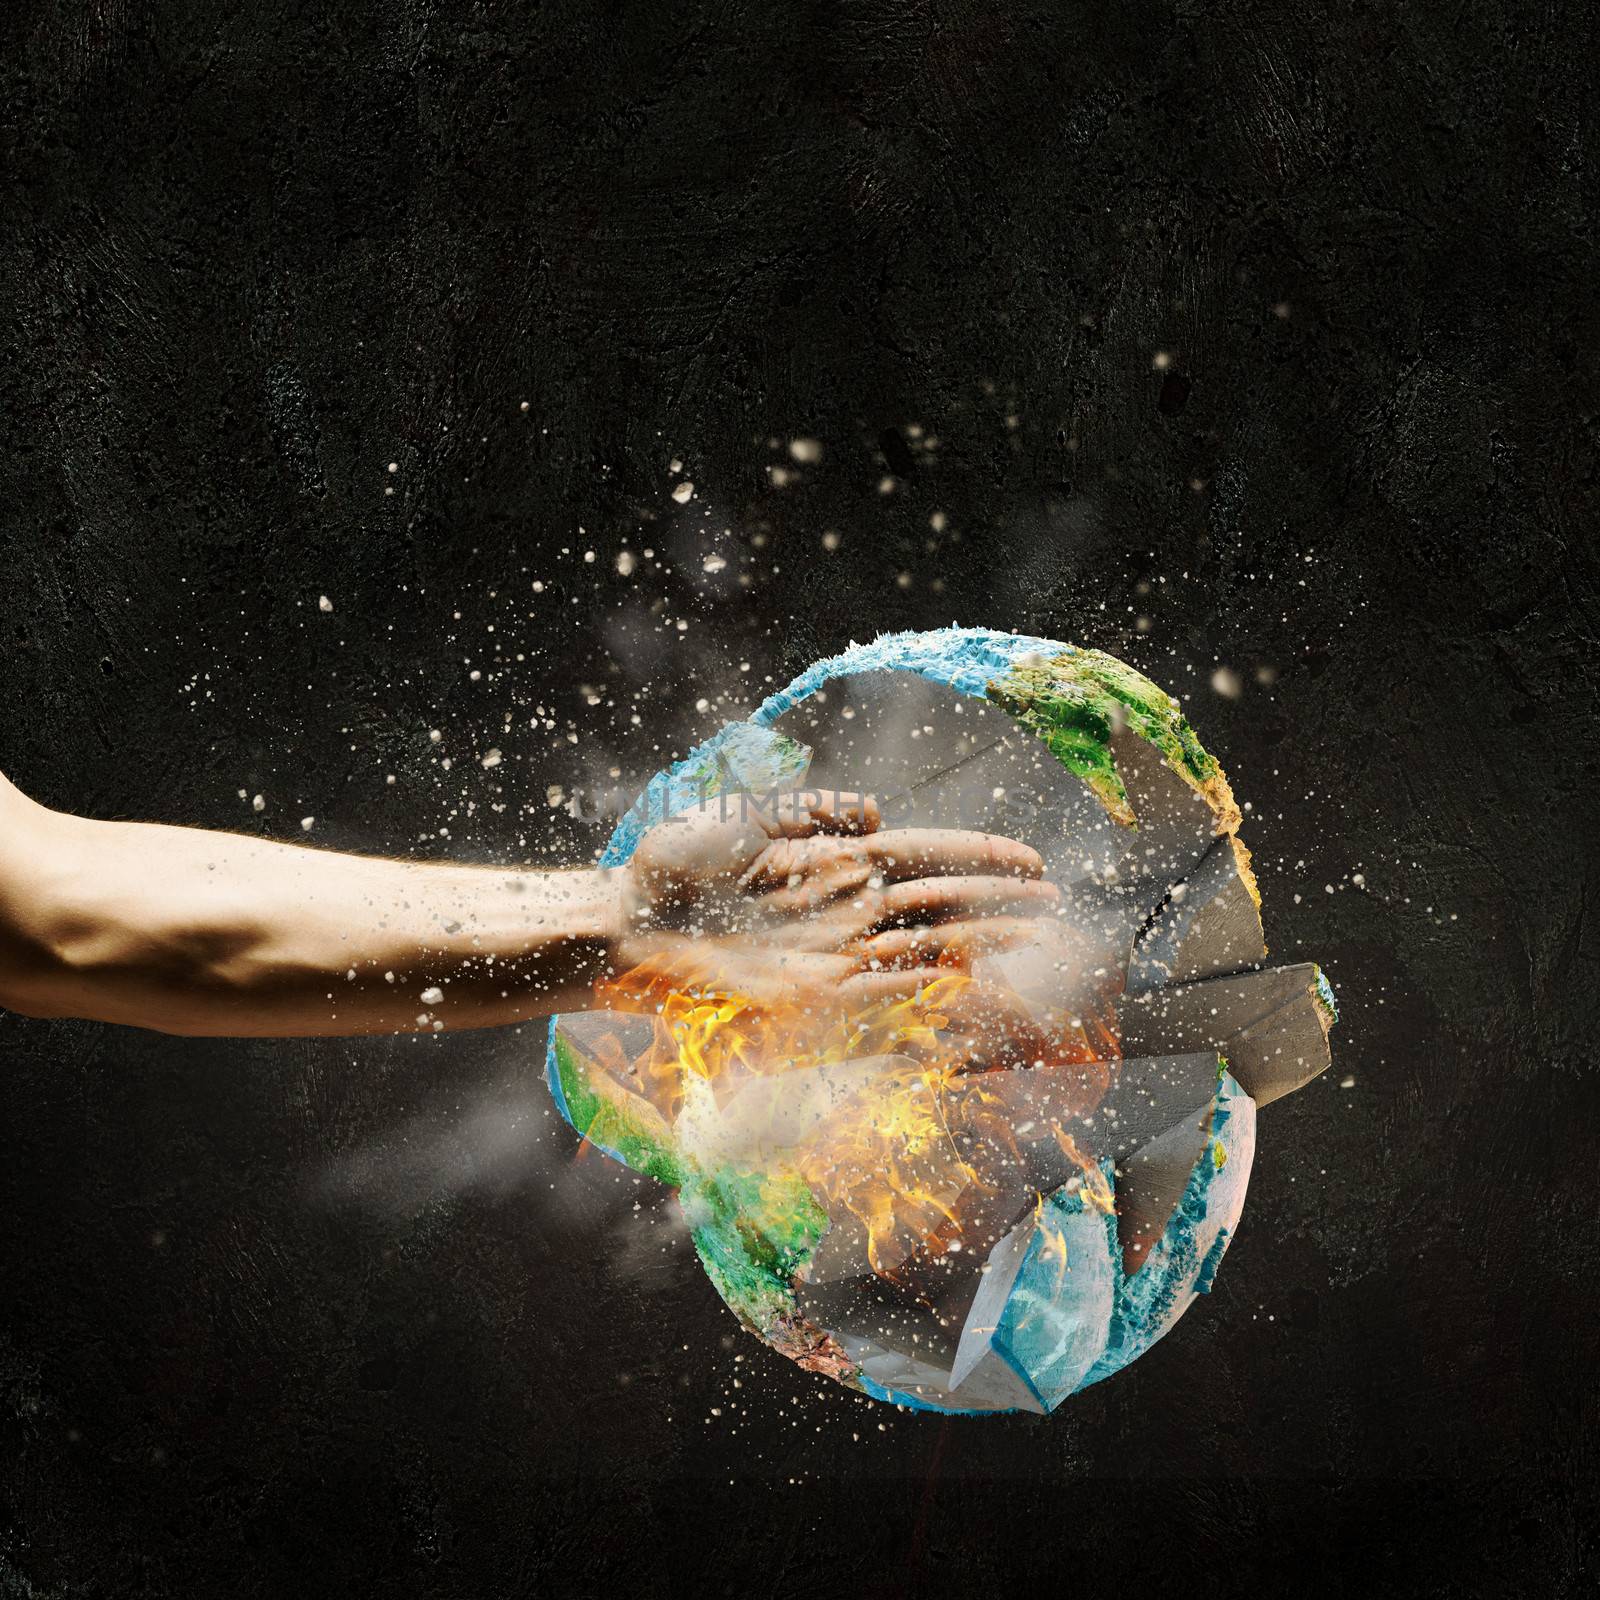 Close up image of human hand breaking earth planet